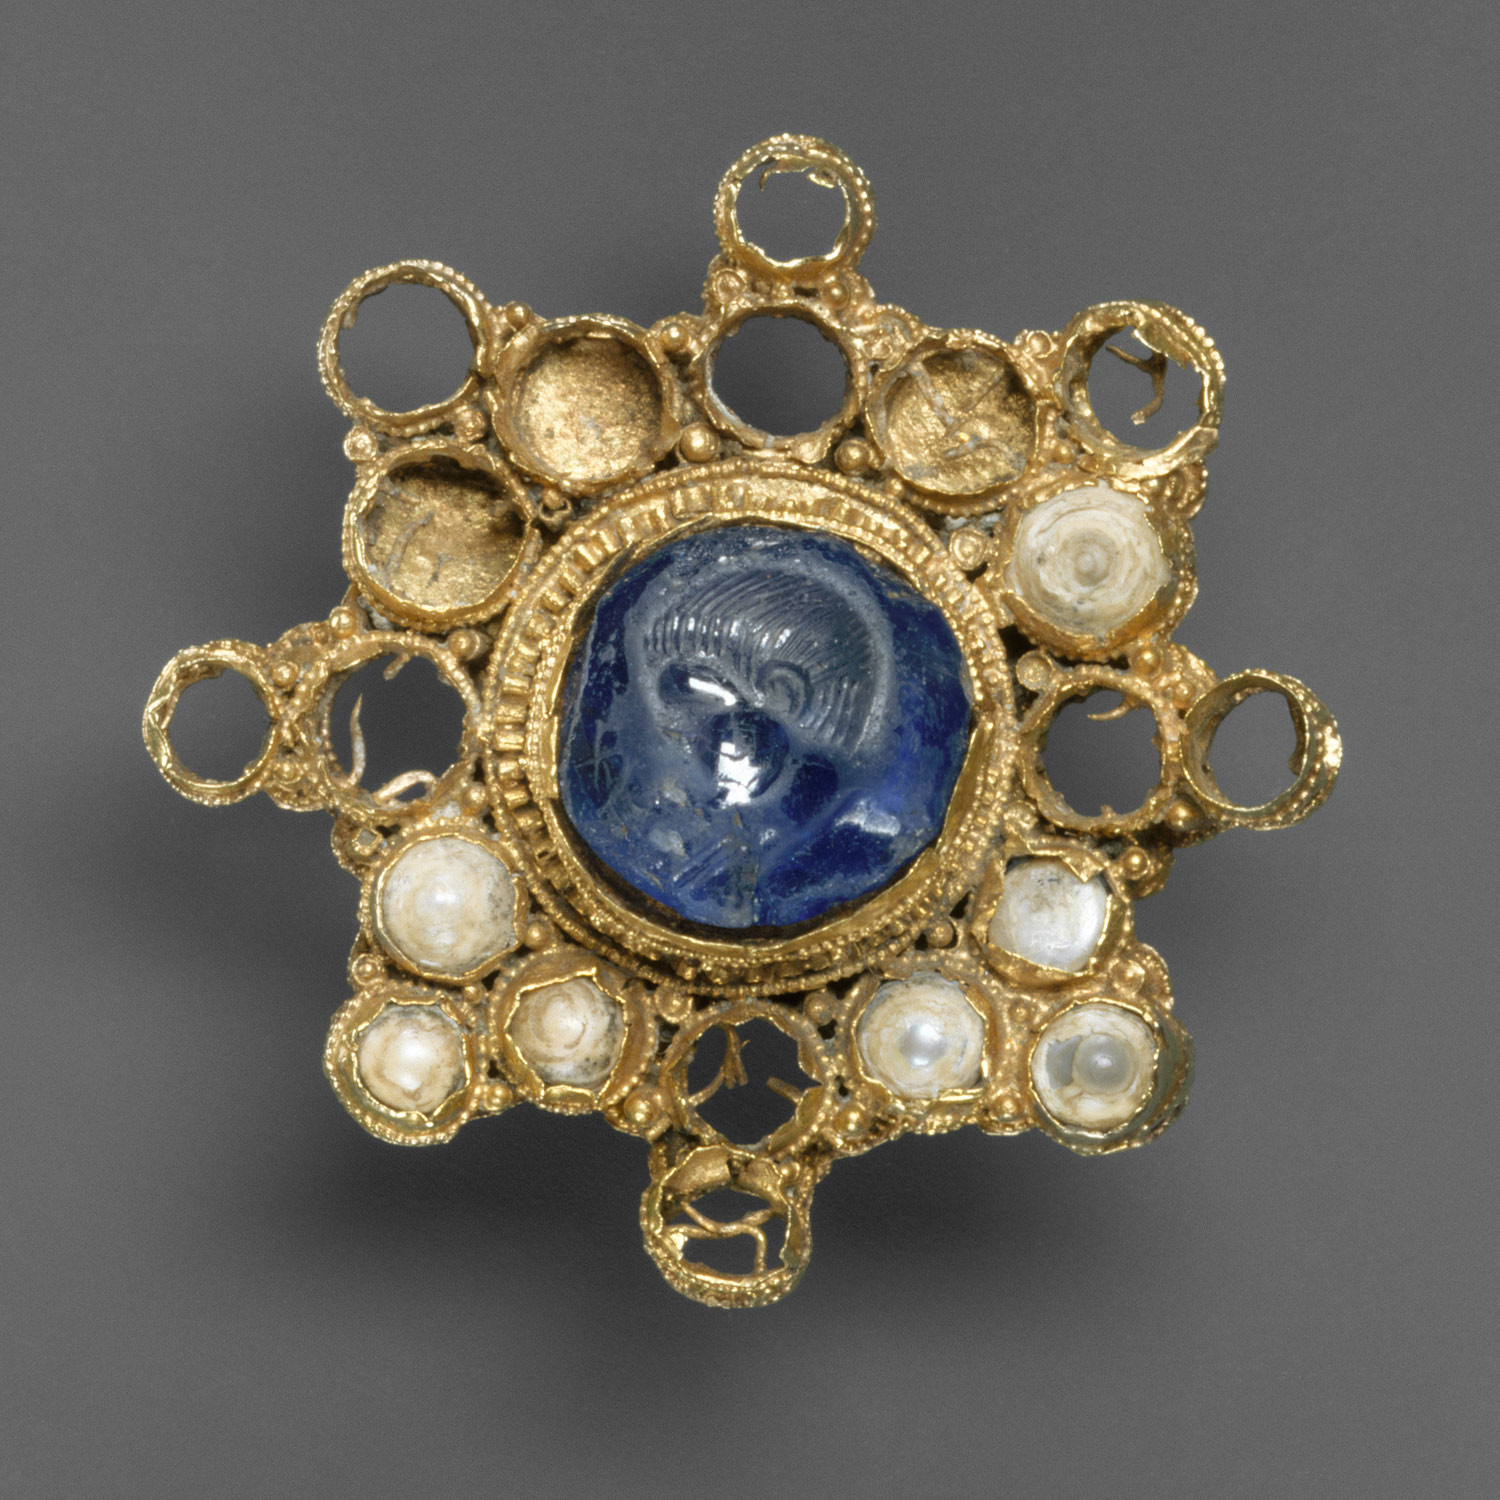 Star-Shaped Brooch with Intaglio